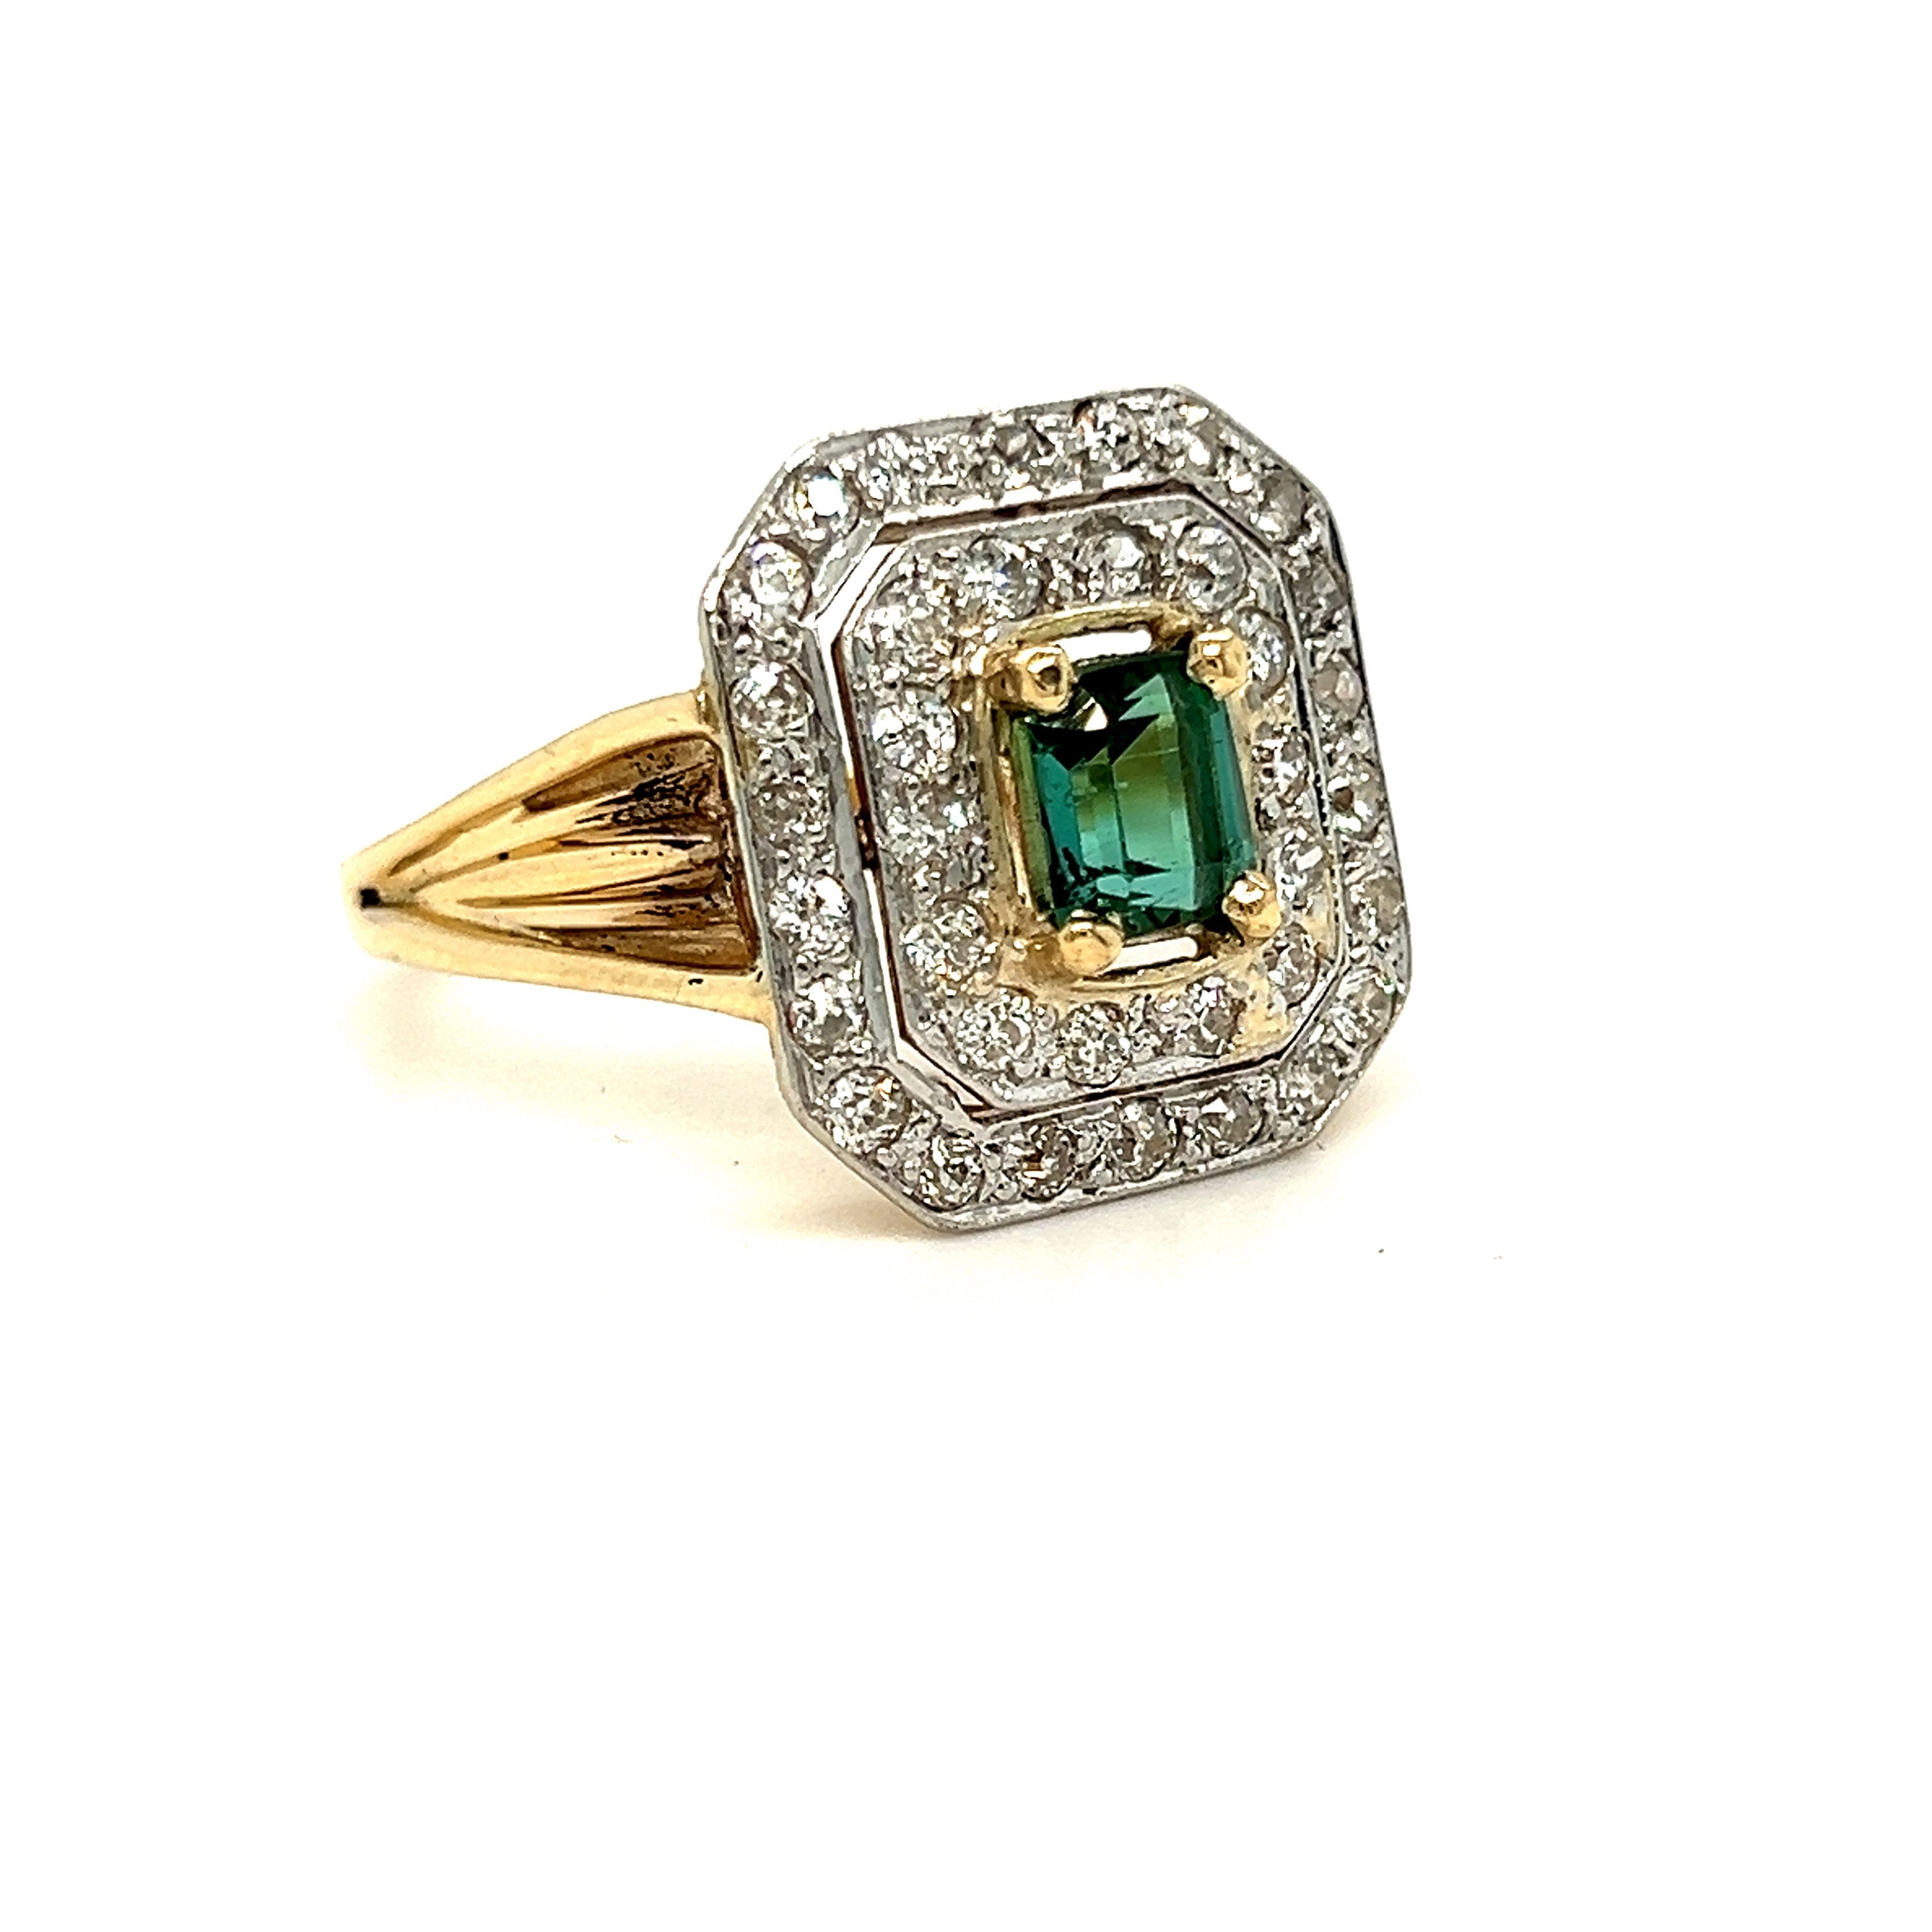 Antique 14K Yellow Gold Double Diamond Halo and Tourmaline Ring Engagement Ring - 2.34ct.